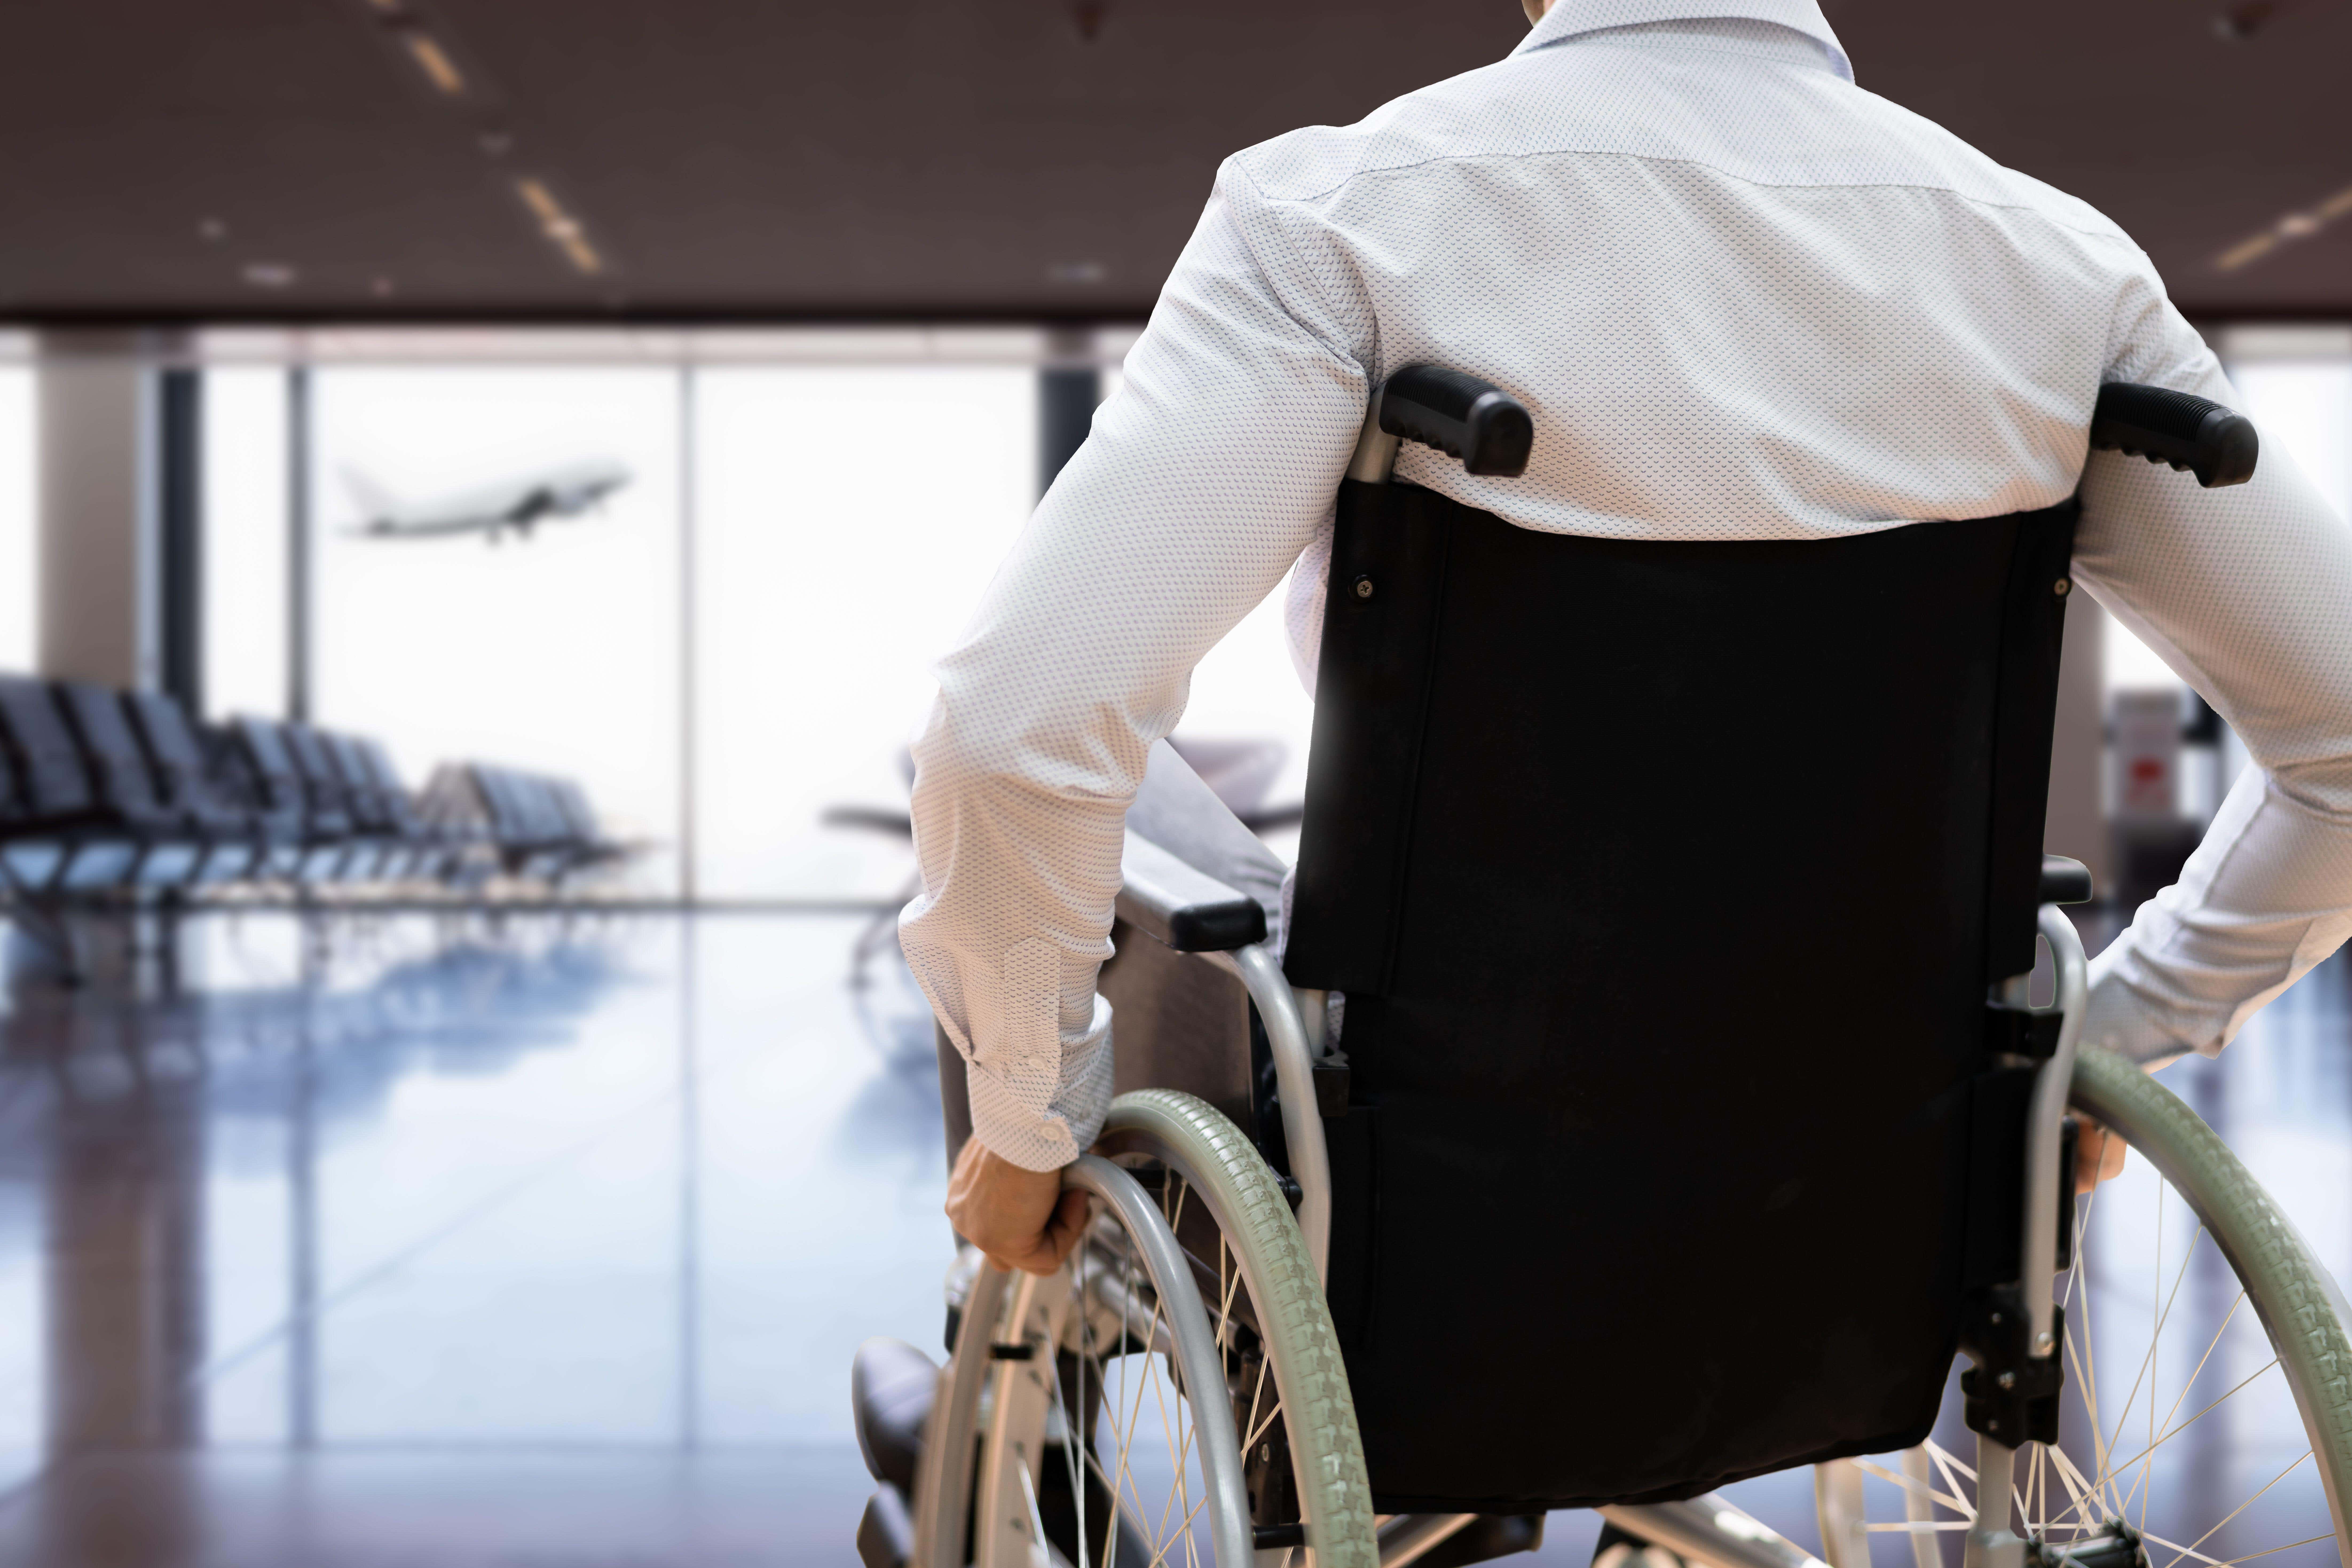 Airlines face more scrutiny over their treatment of disabled and less mobile passengers (Andriy Popov/Alamy Stock Photo/PA)